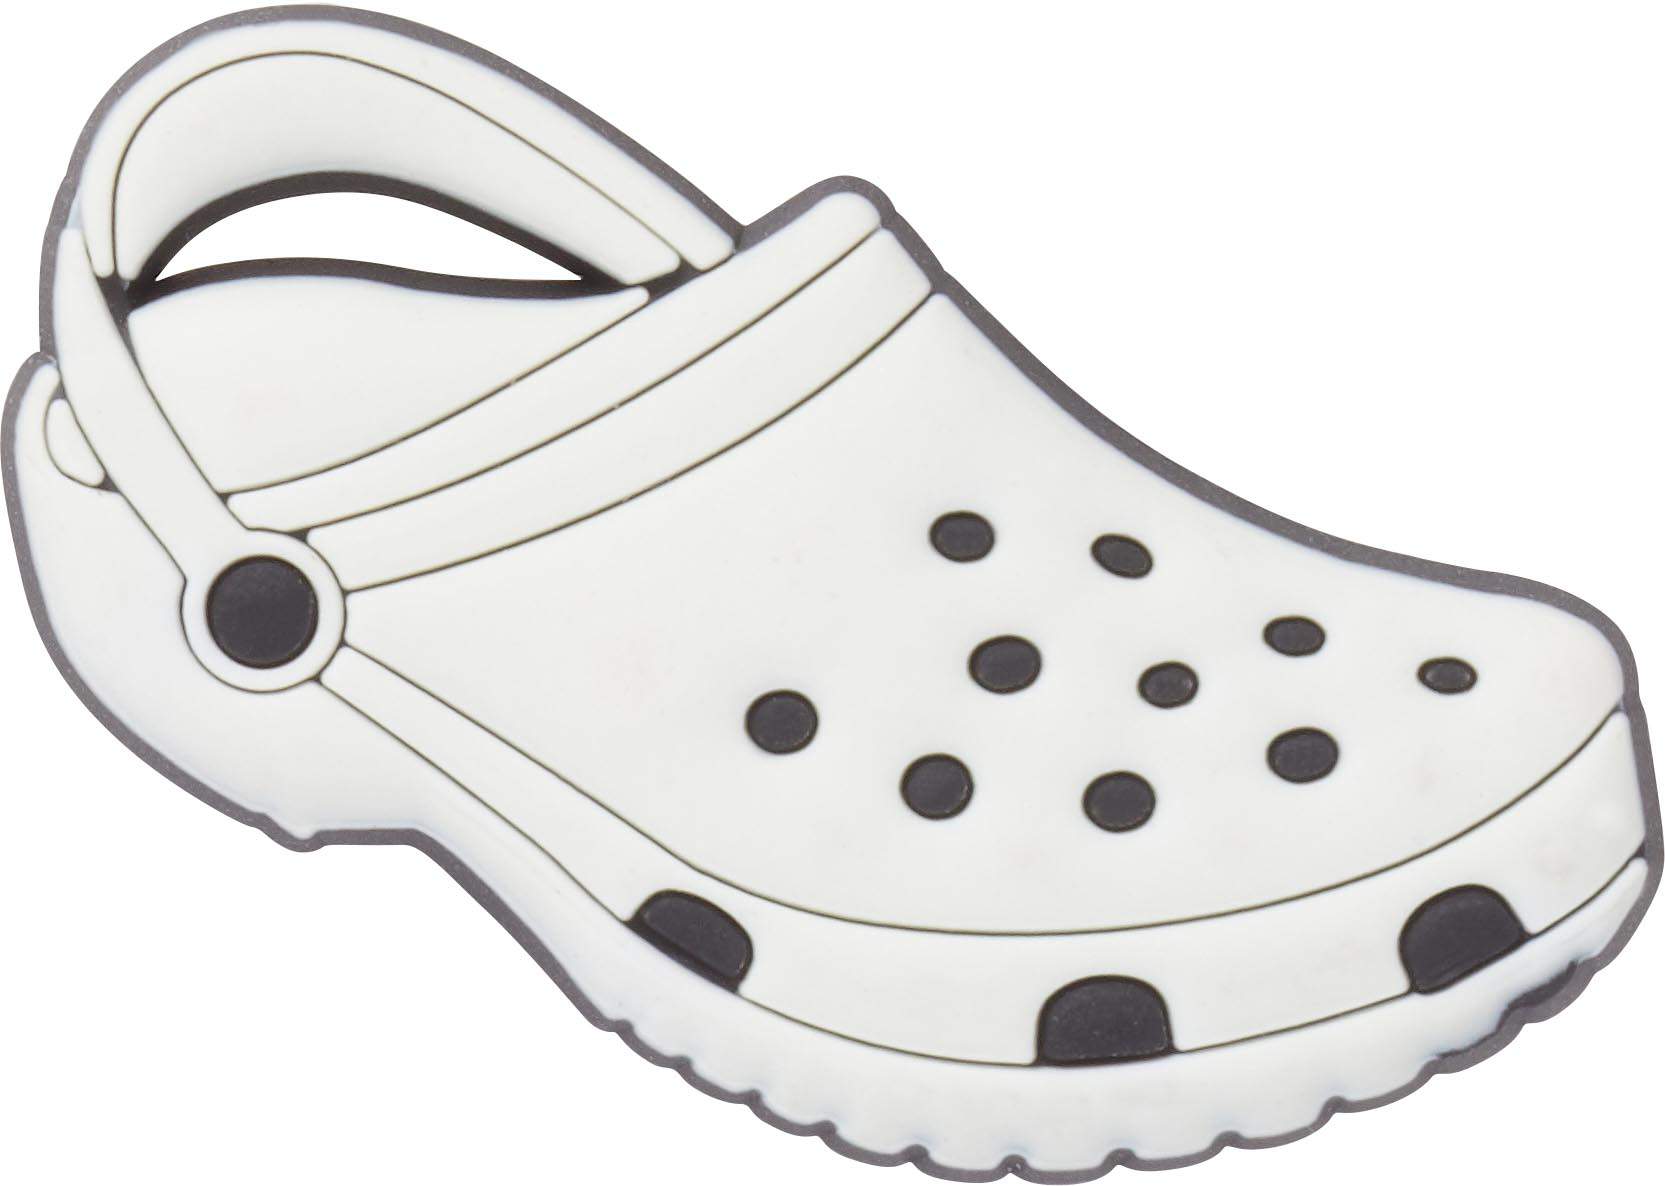 white crocs that say crocs on the side